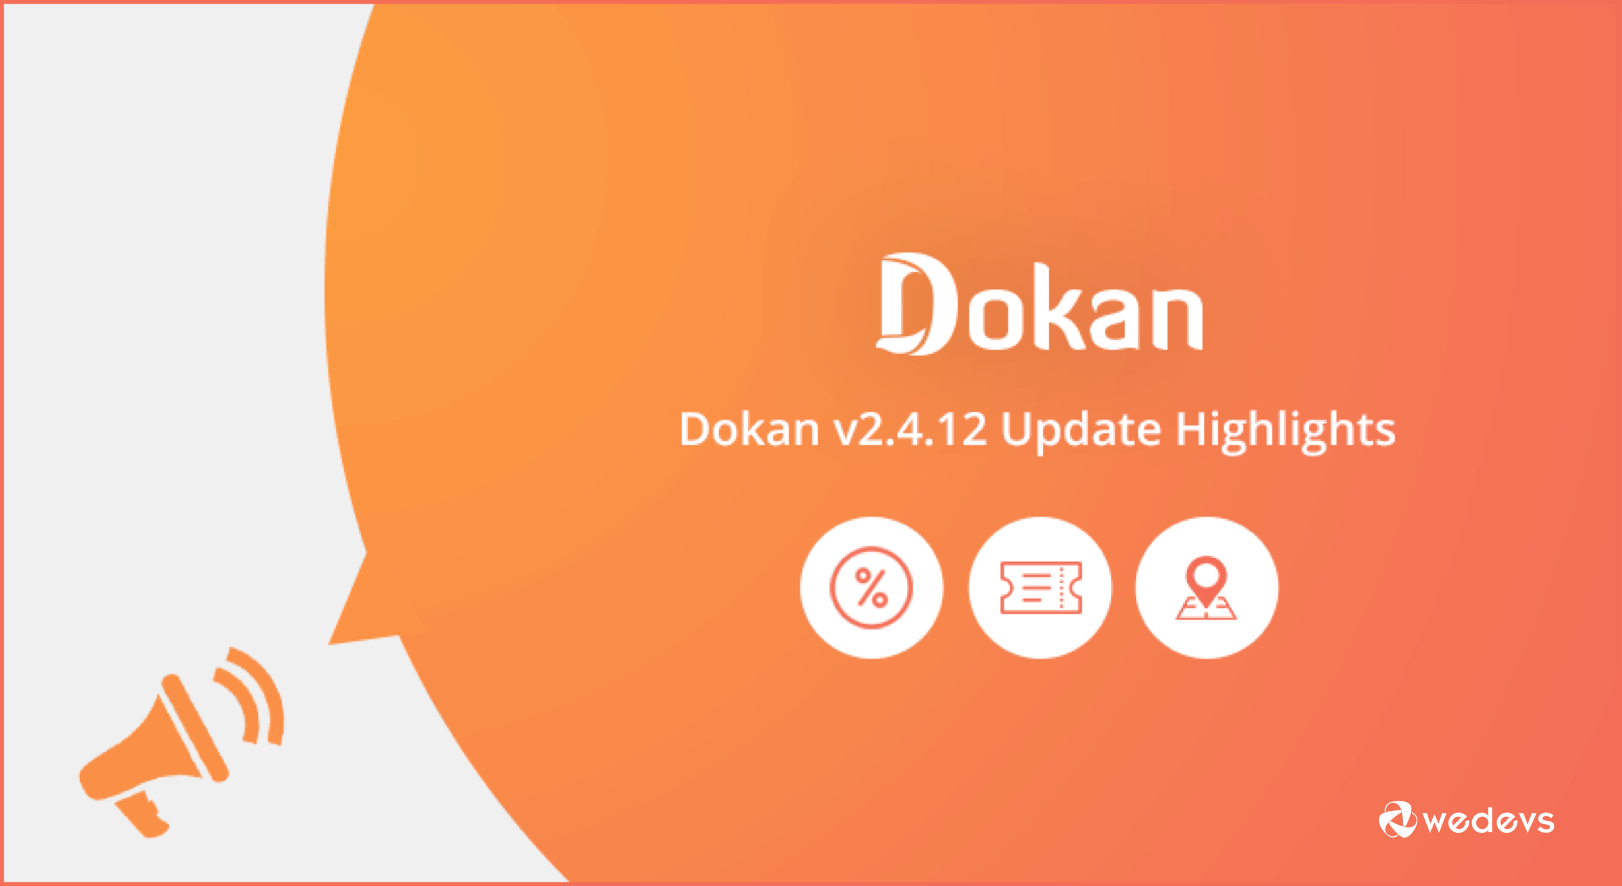 Upcoming New Features of Dokan Multi-vendor Marketplace